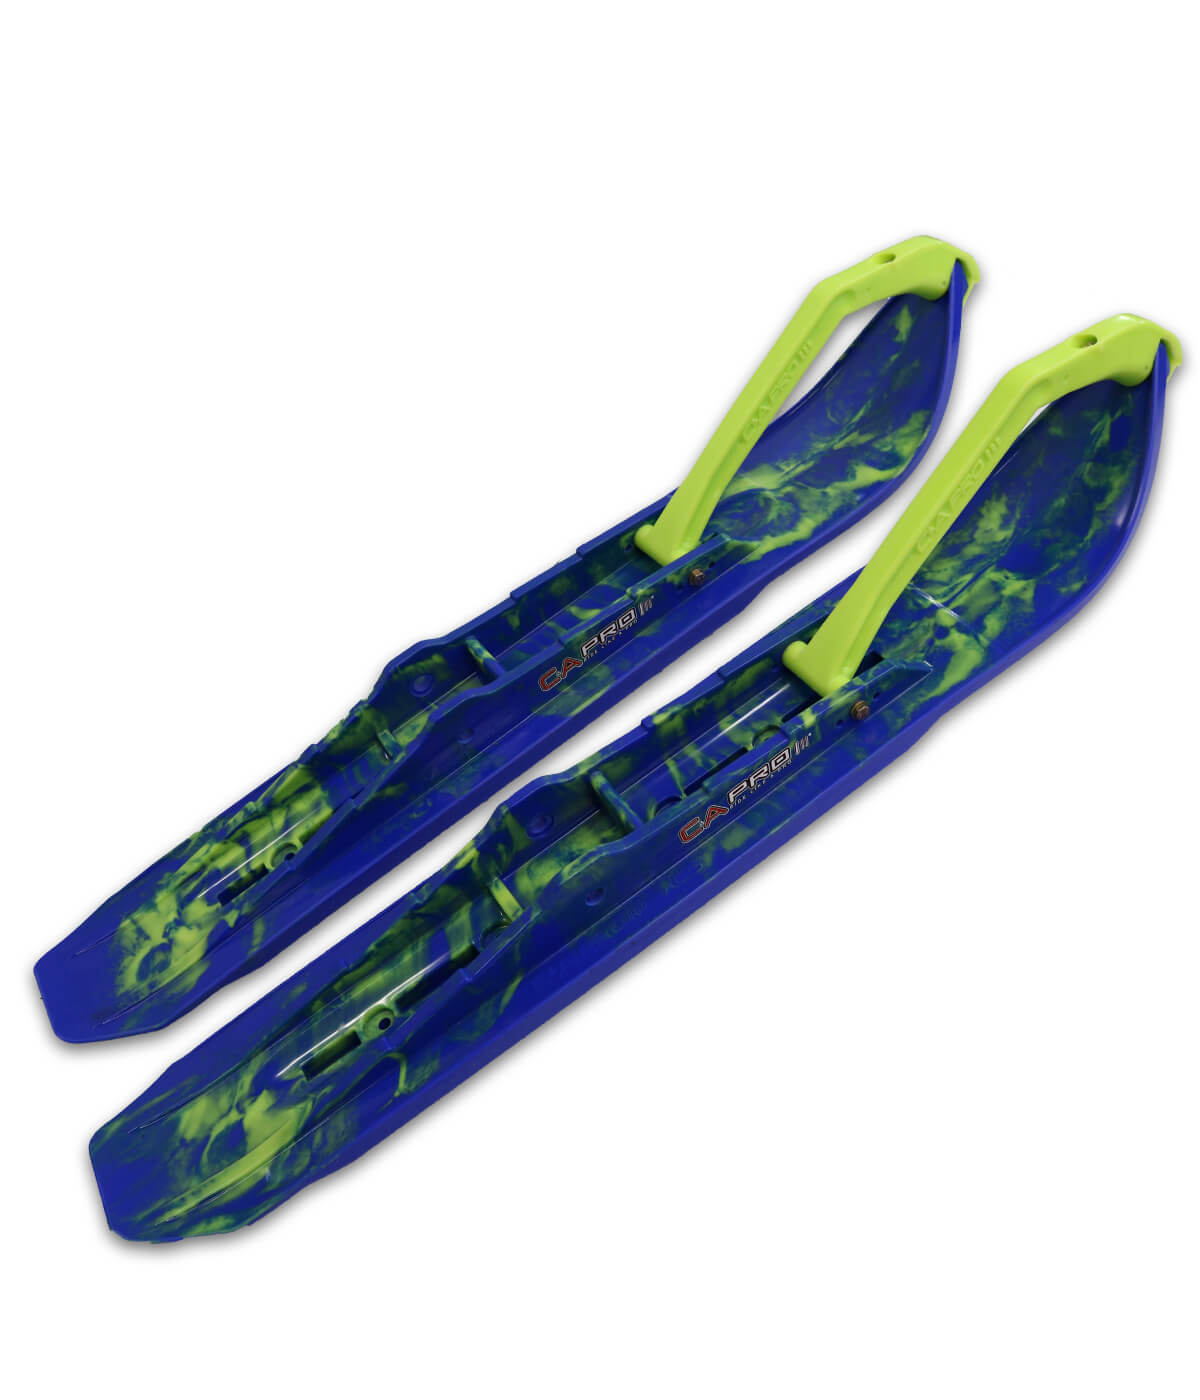 Blue XCS crossover skis with Lime Green accent and Lime Green handles